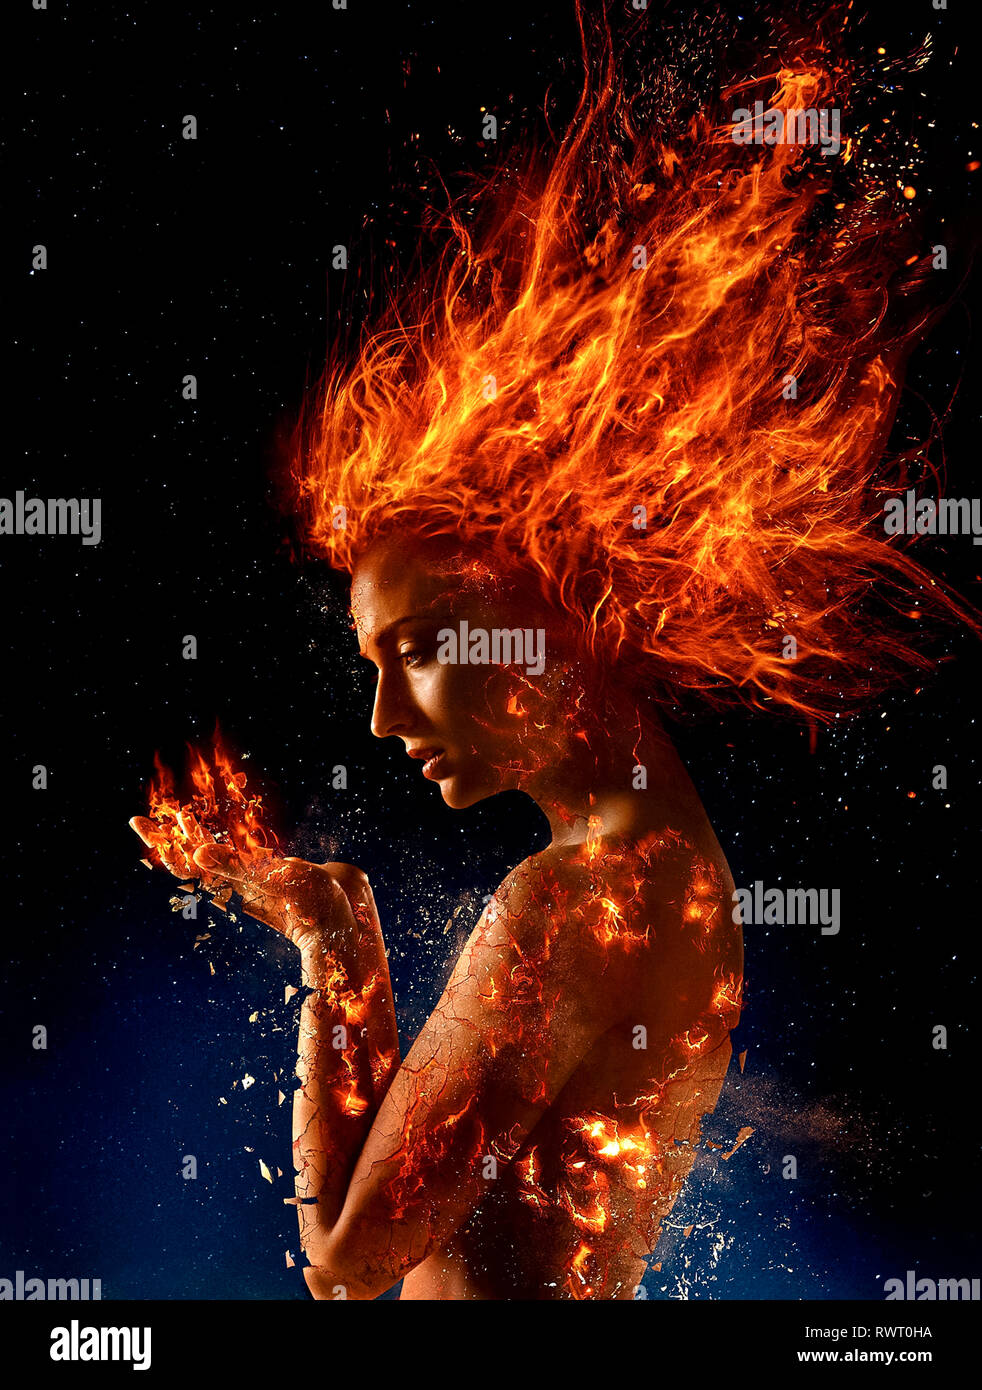 Dark Phoenix (2019) directed by Simon Kinberg and starring Sophie Turner, Jennifer Lawrence and James McAvoy. Jean Grey succumbs to the dark side of her power and turns into the Dark Phoenix. Can the X-men save her? Stock Photo